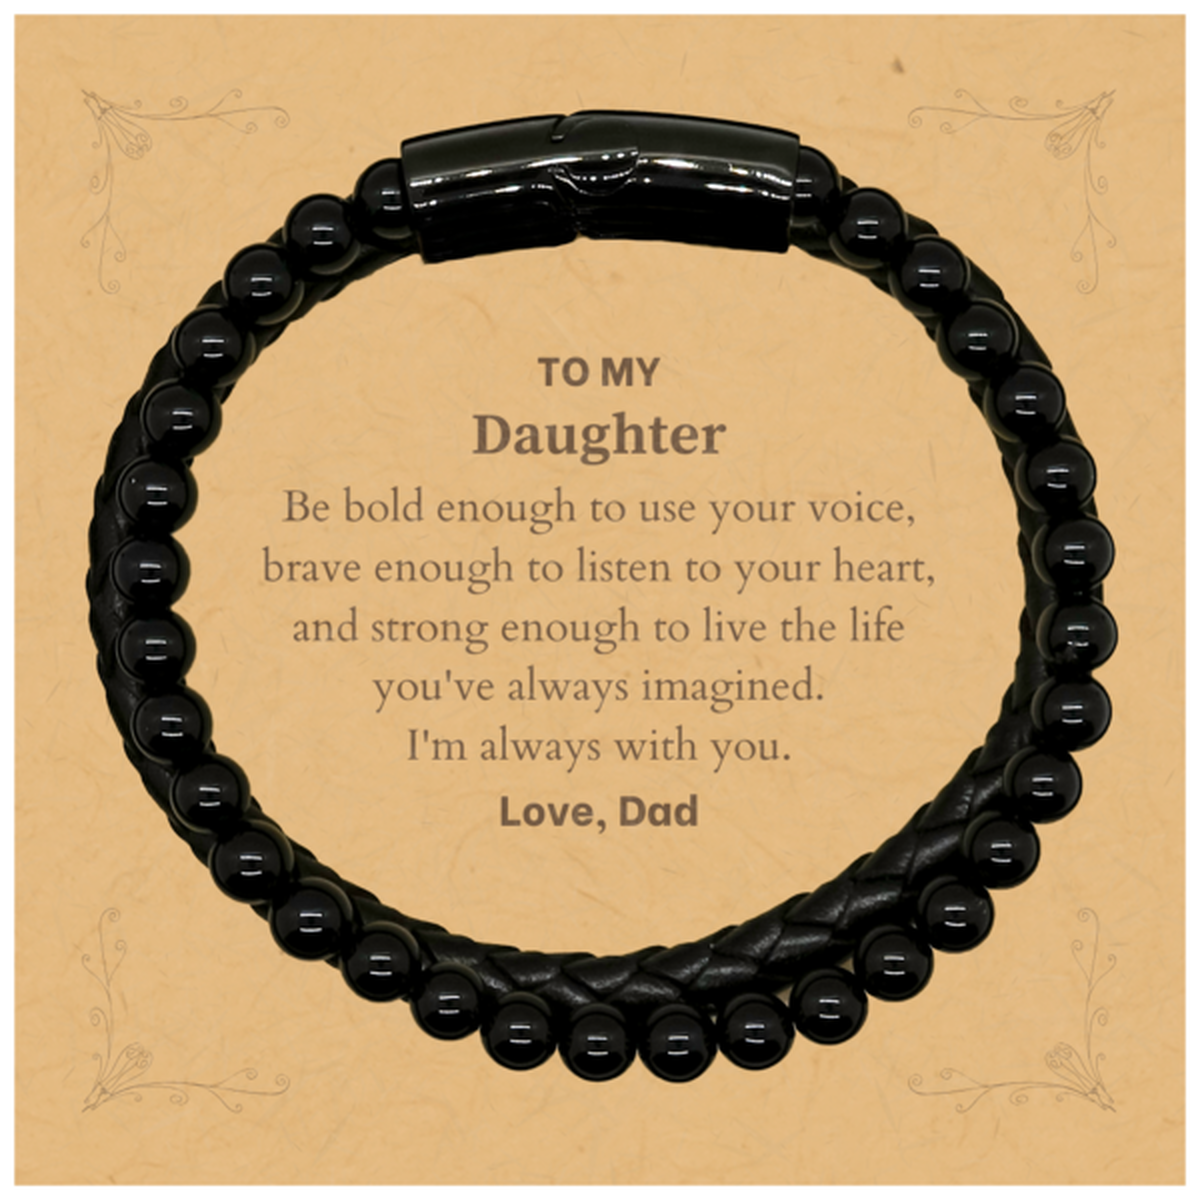 Keepsake Daughter Stone Leather Bracelets Gift Idea Graduation Christmas Birthday Daughter from Dad, Daughter Be bold enough to use your voice, brave enough to listen to your heart. Love, Dad